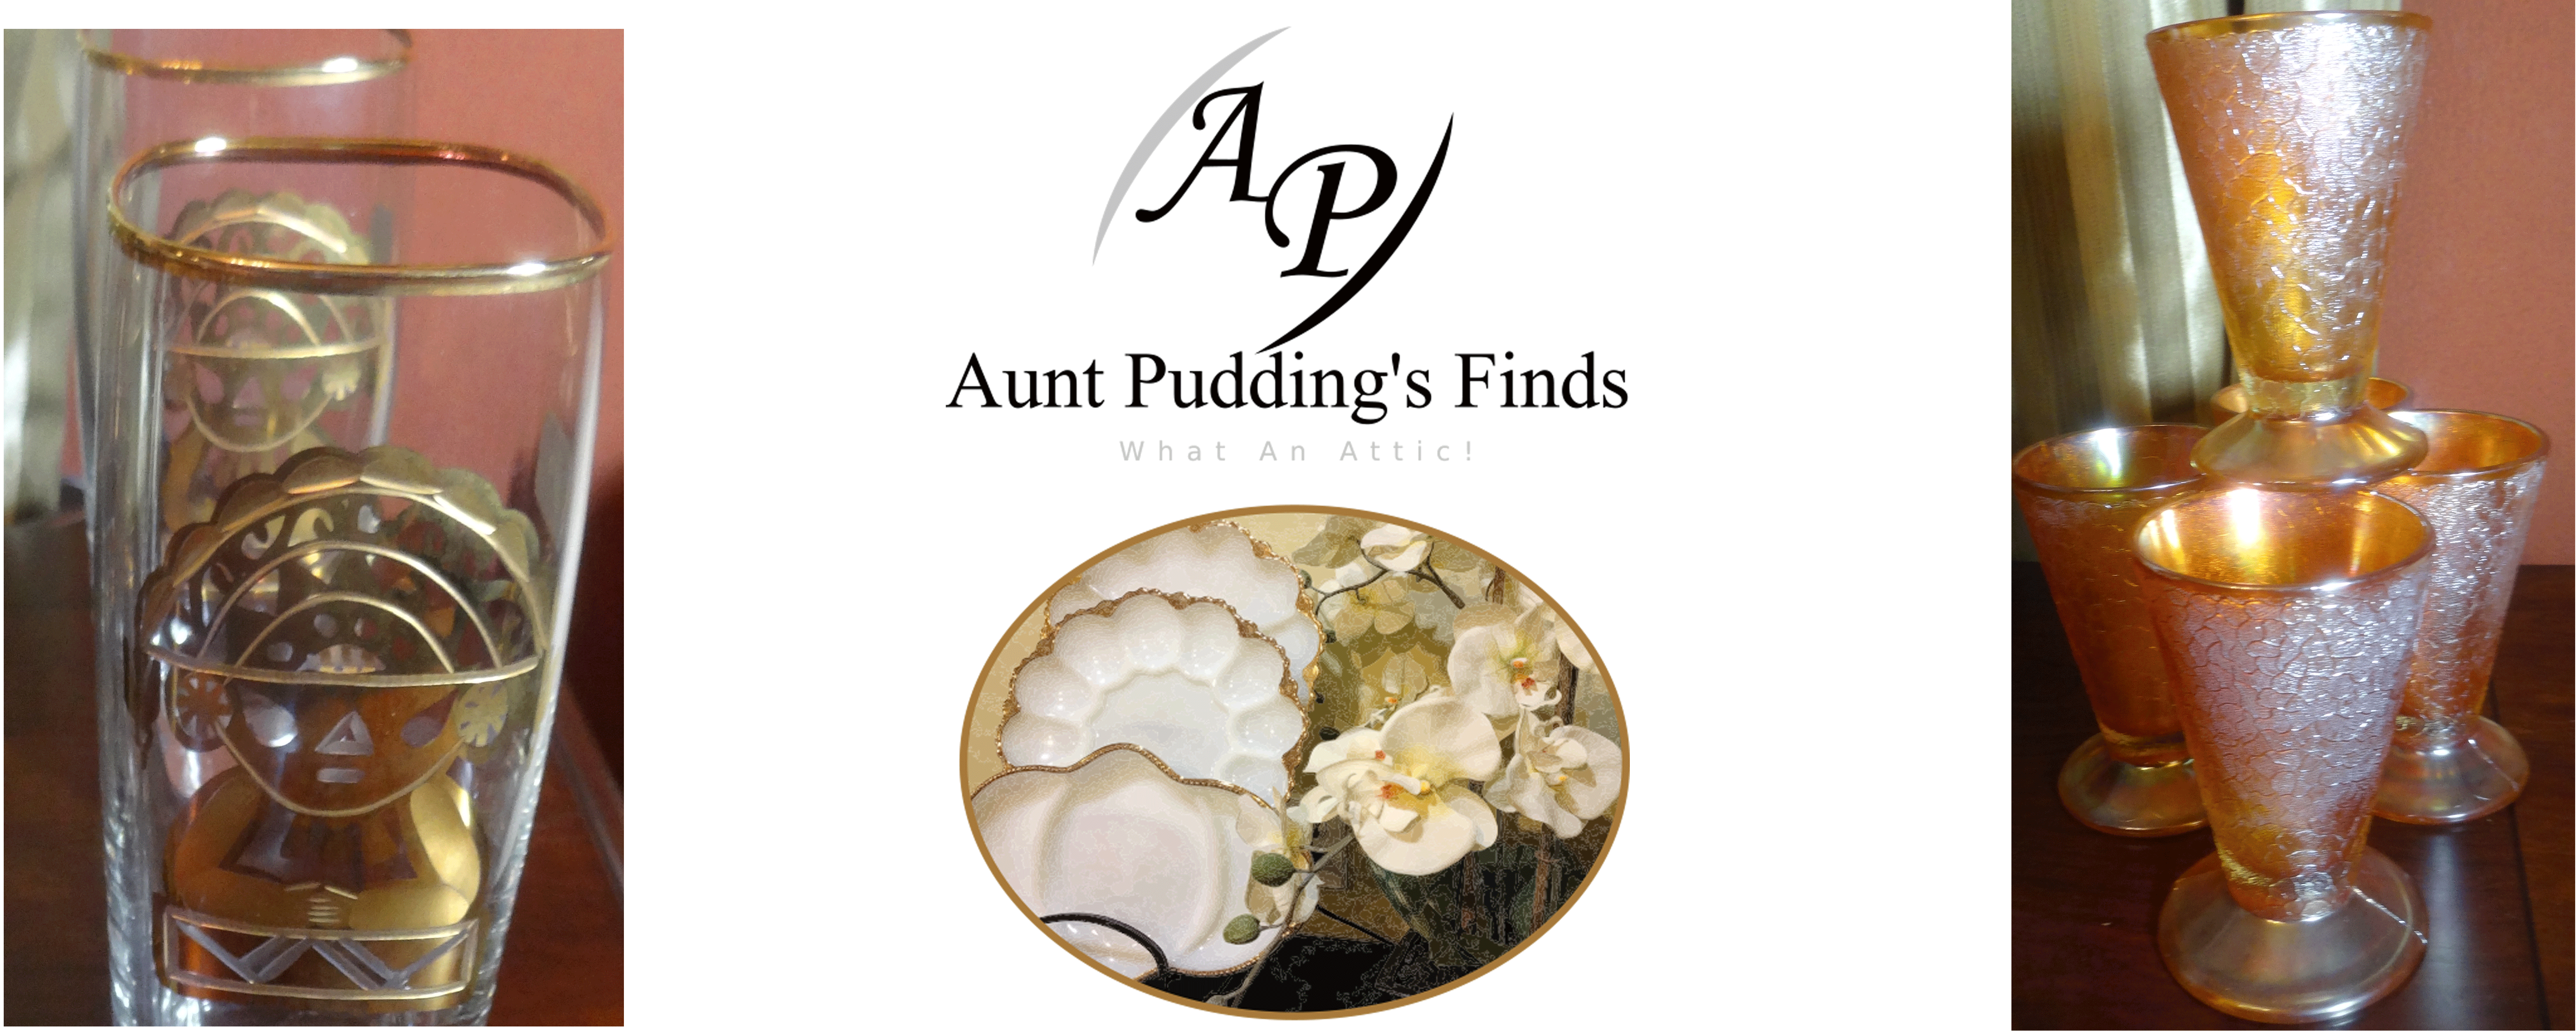 Aunt Pudding's Finds